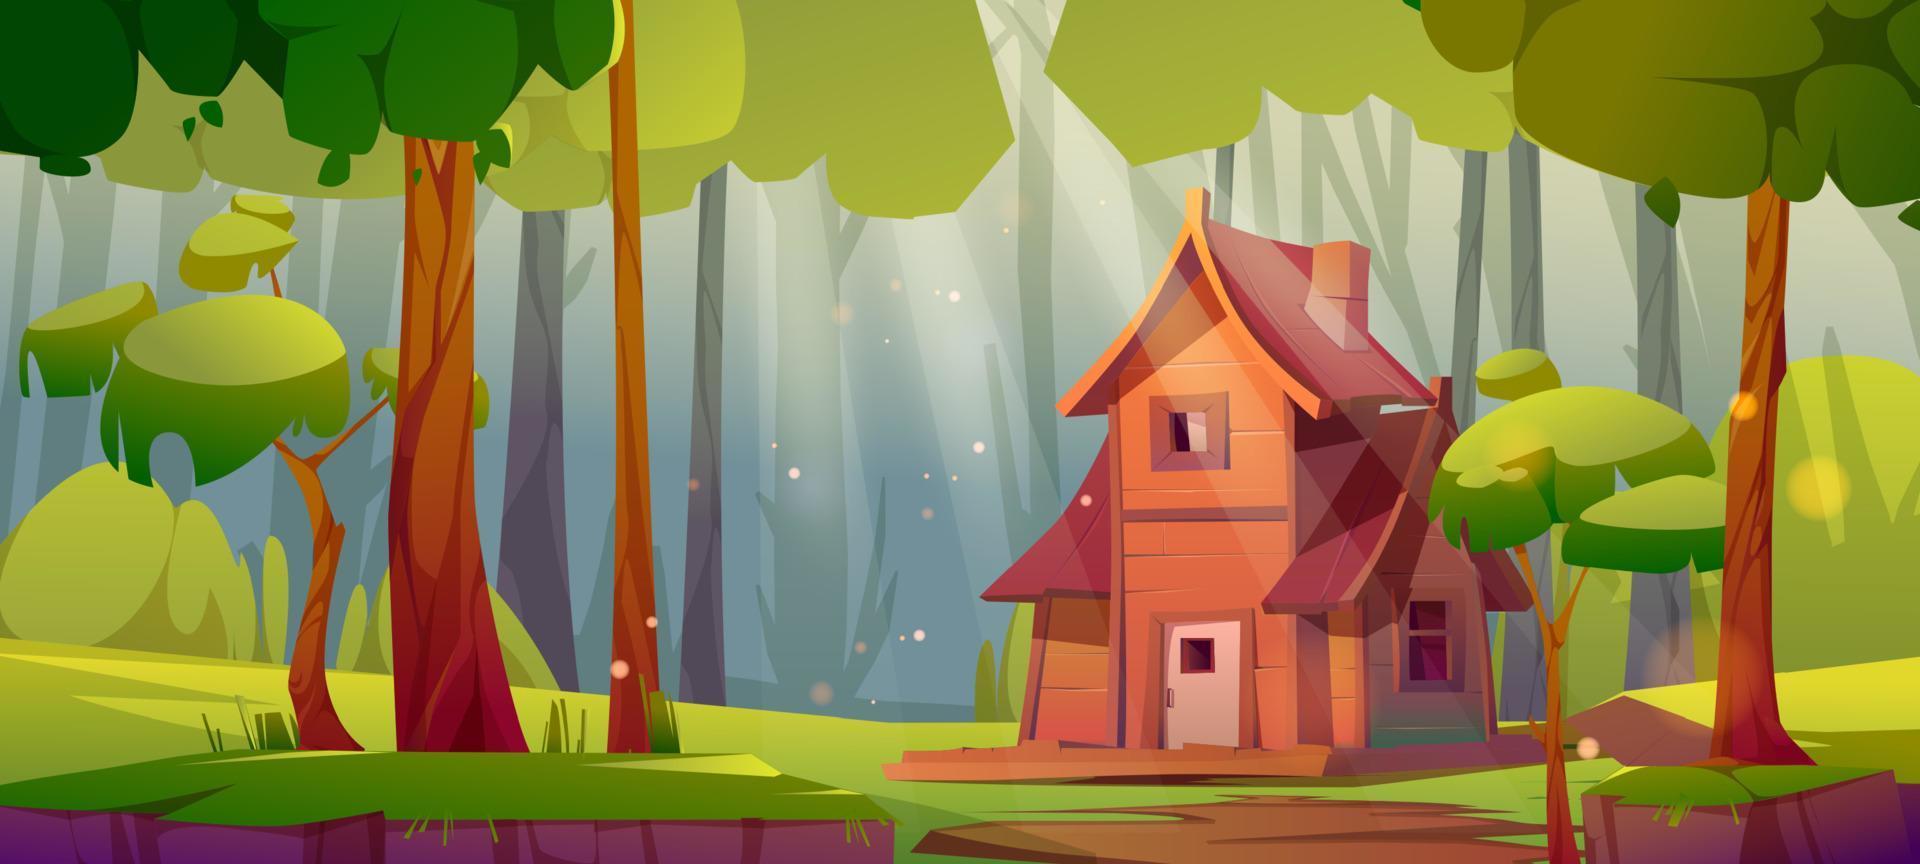 Summer forest with wooden house on glade vector